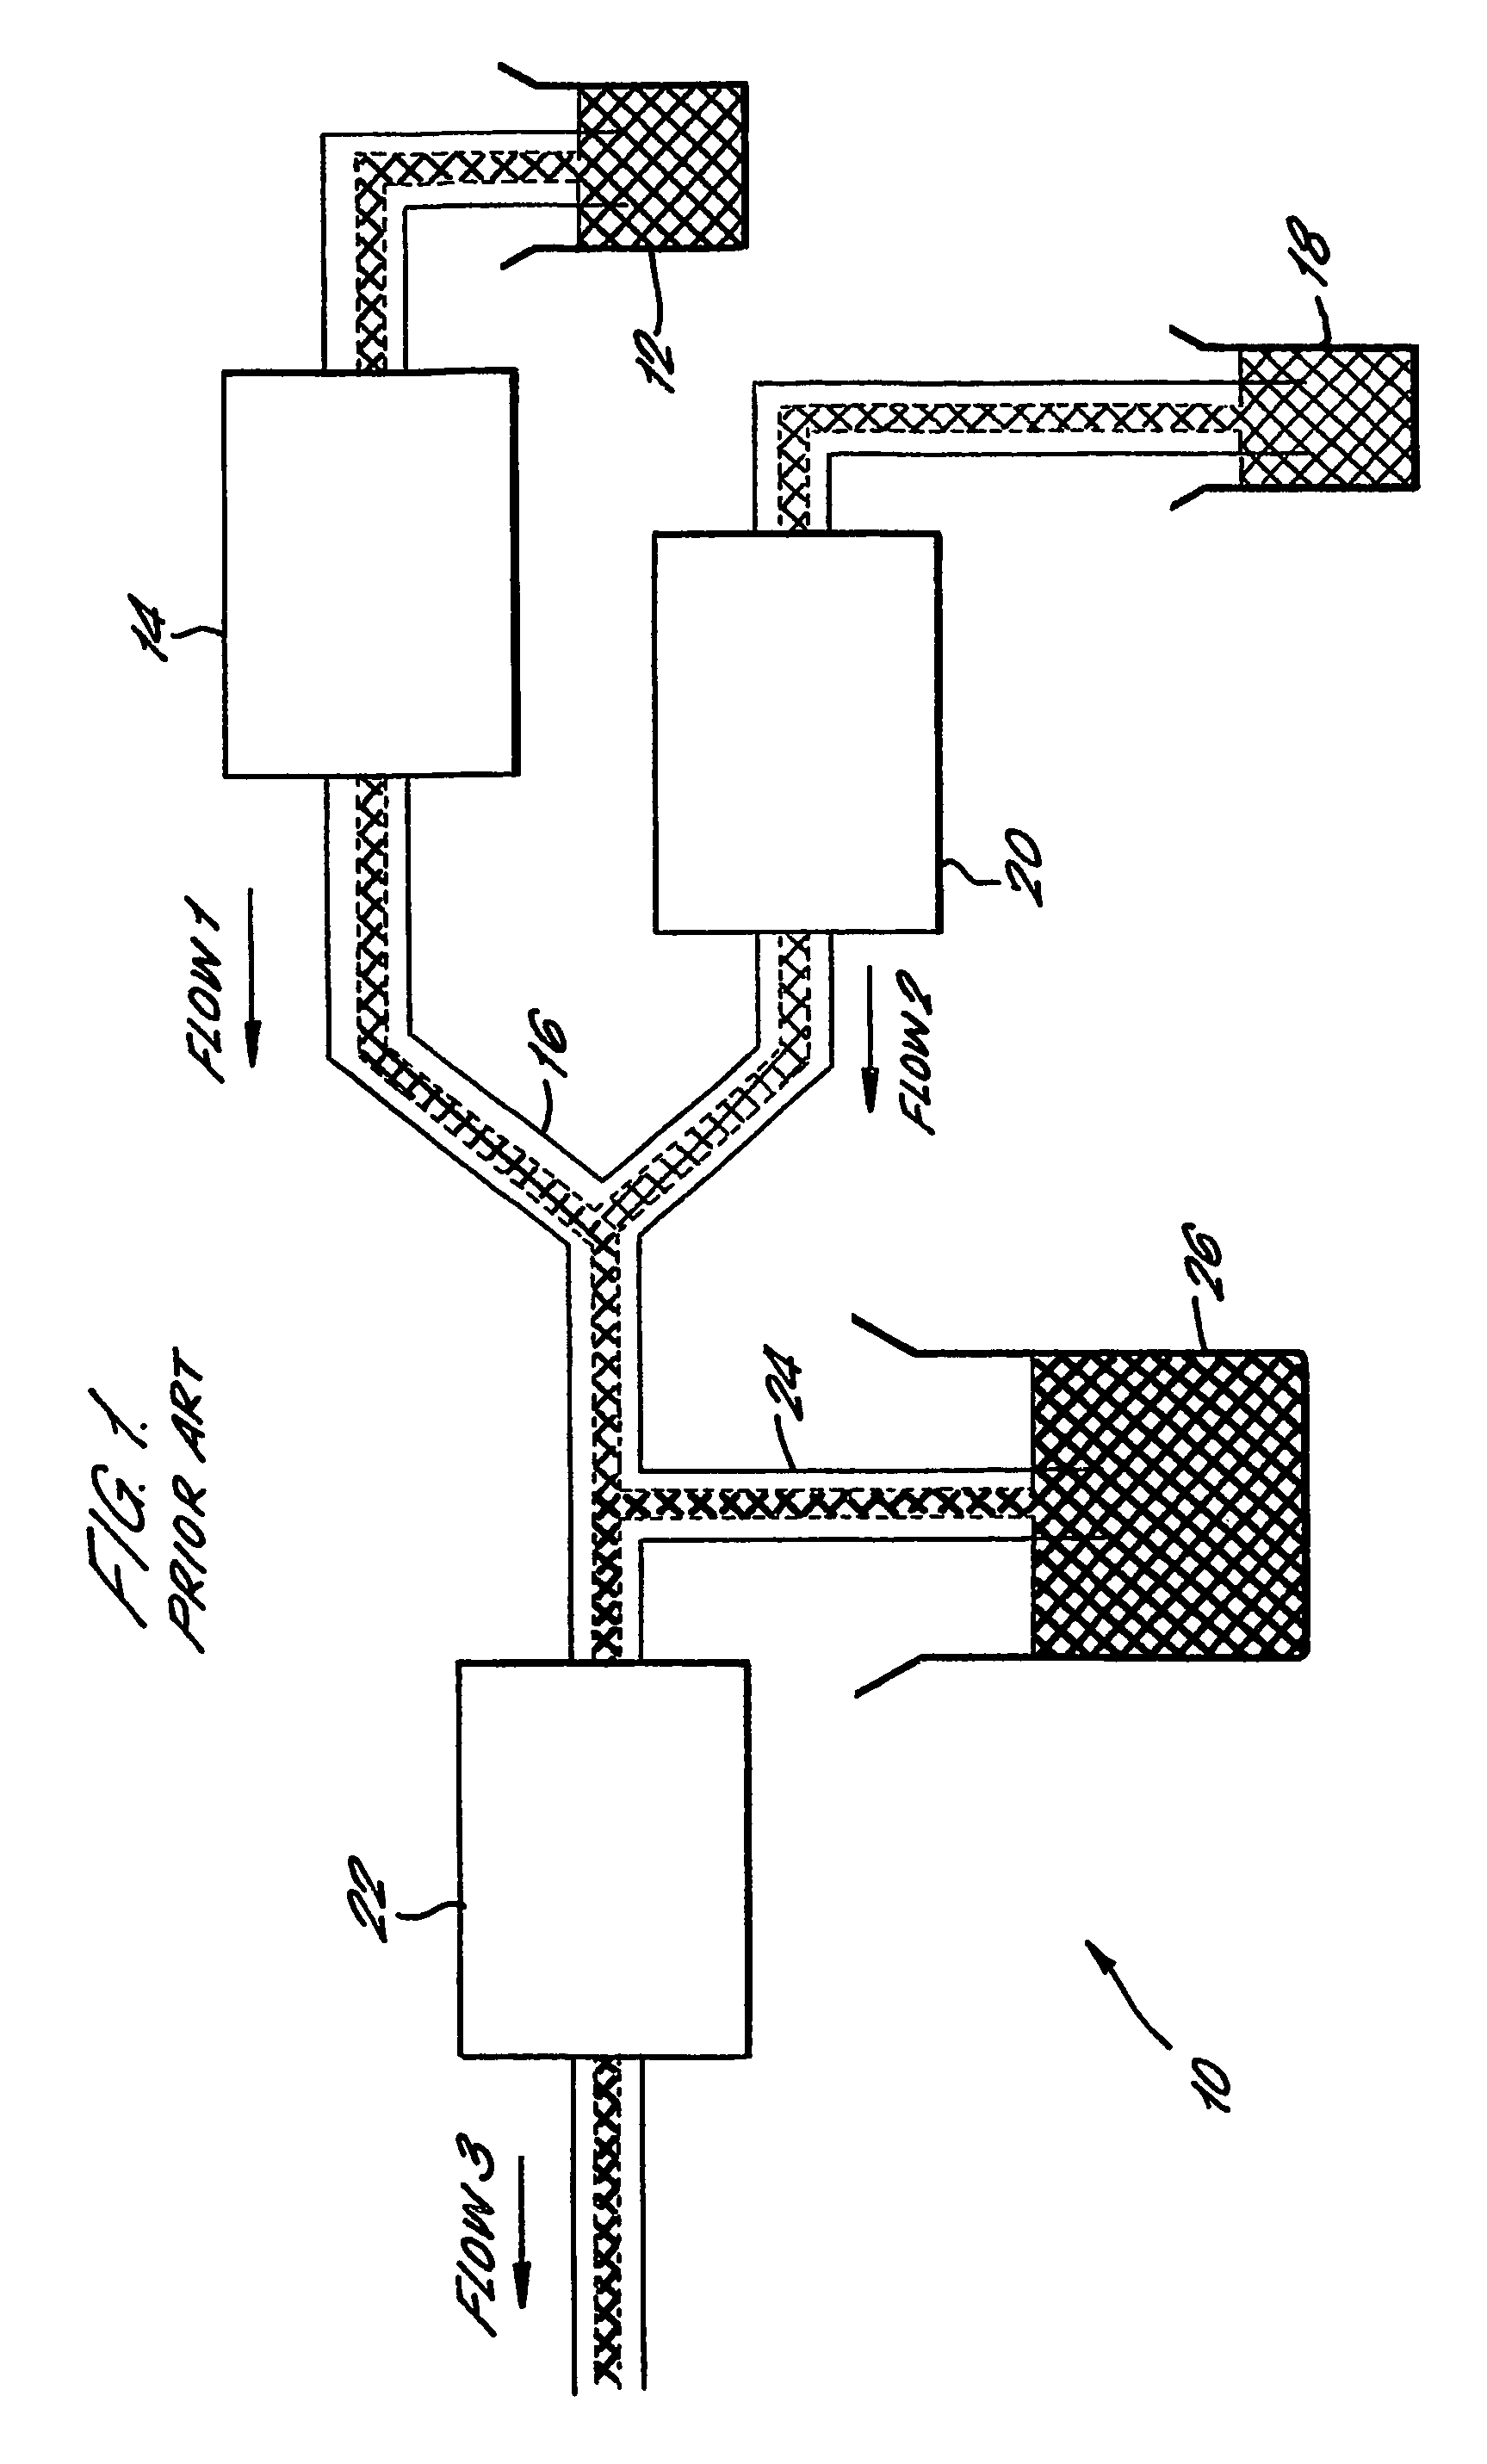 Device and method for diluting a sample